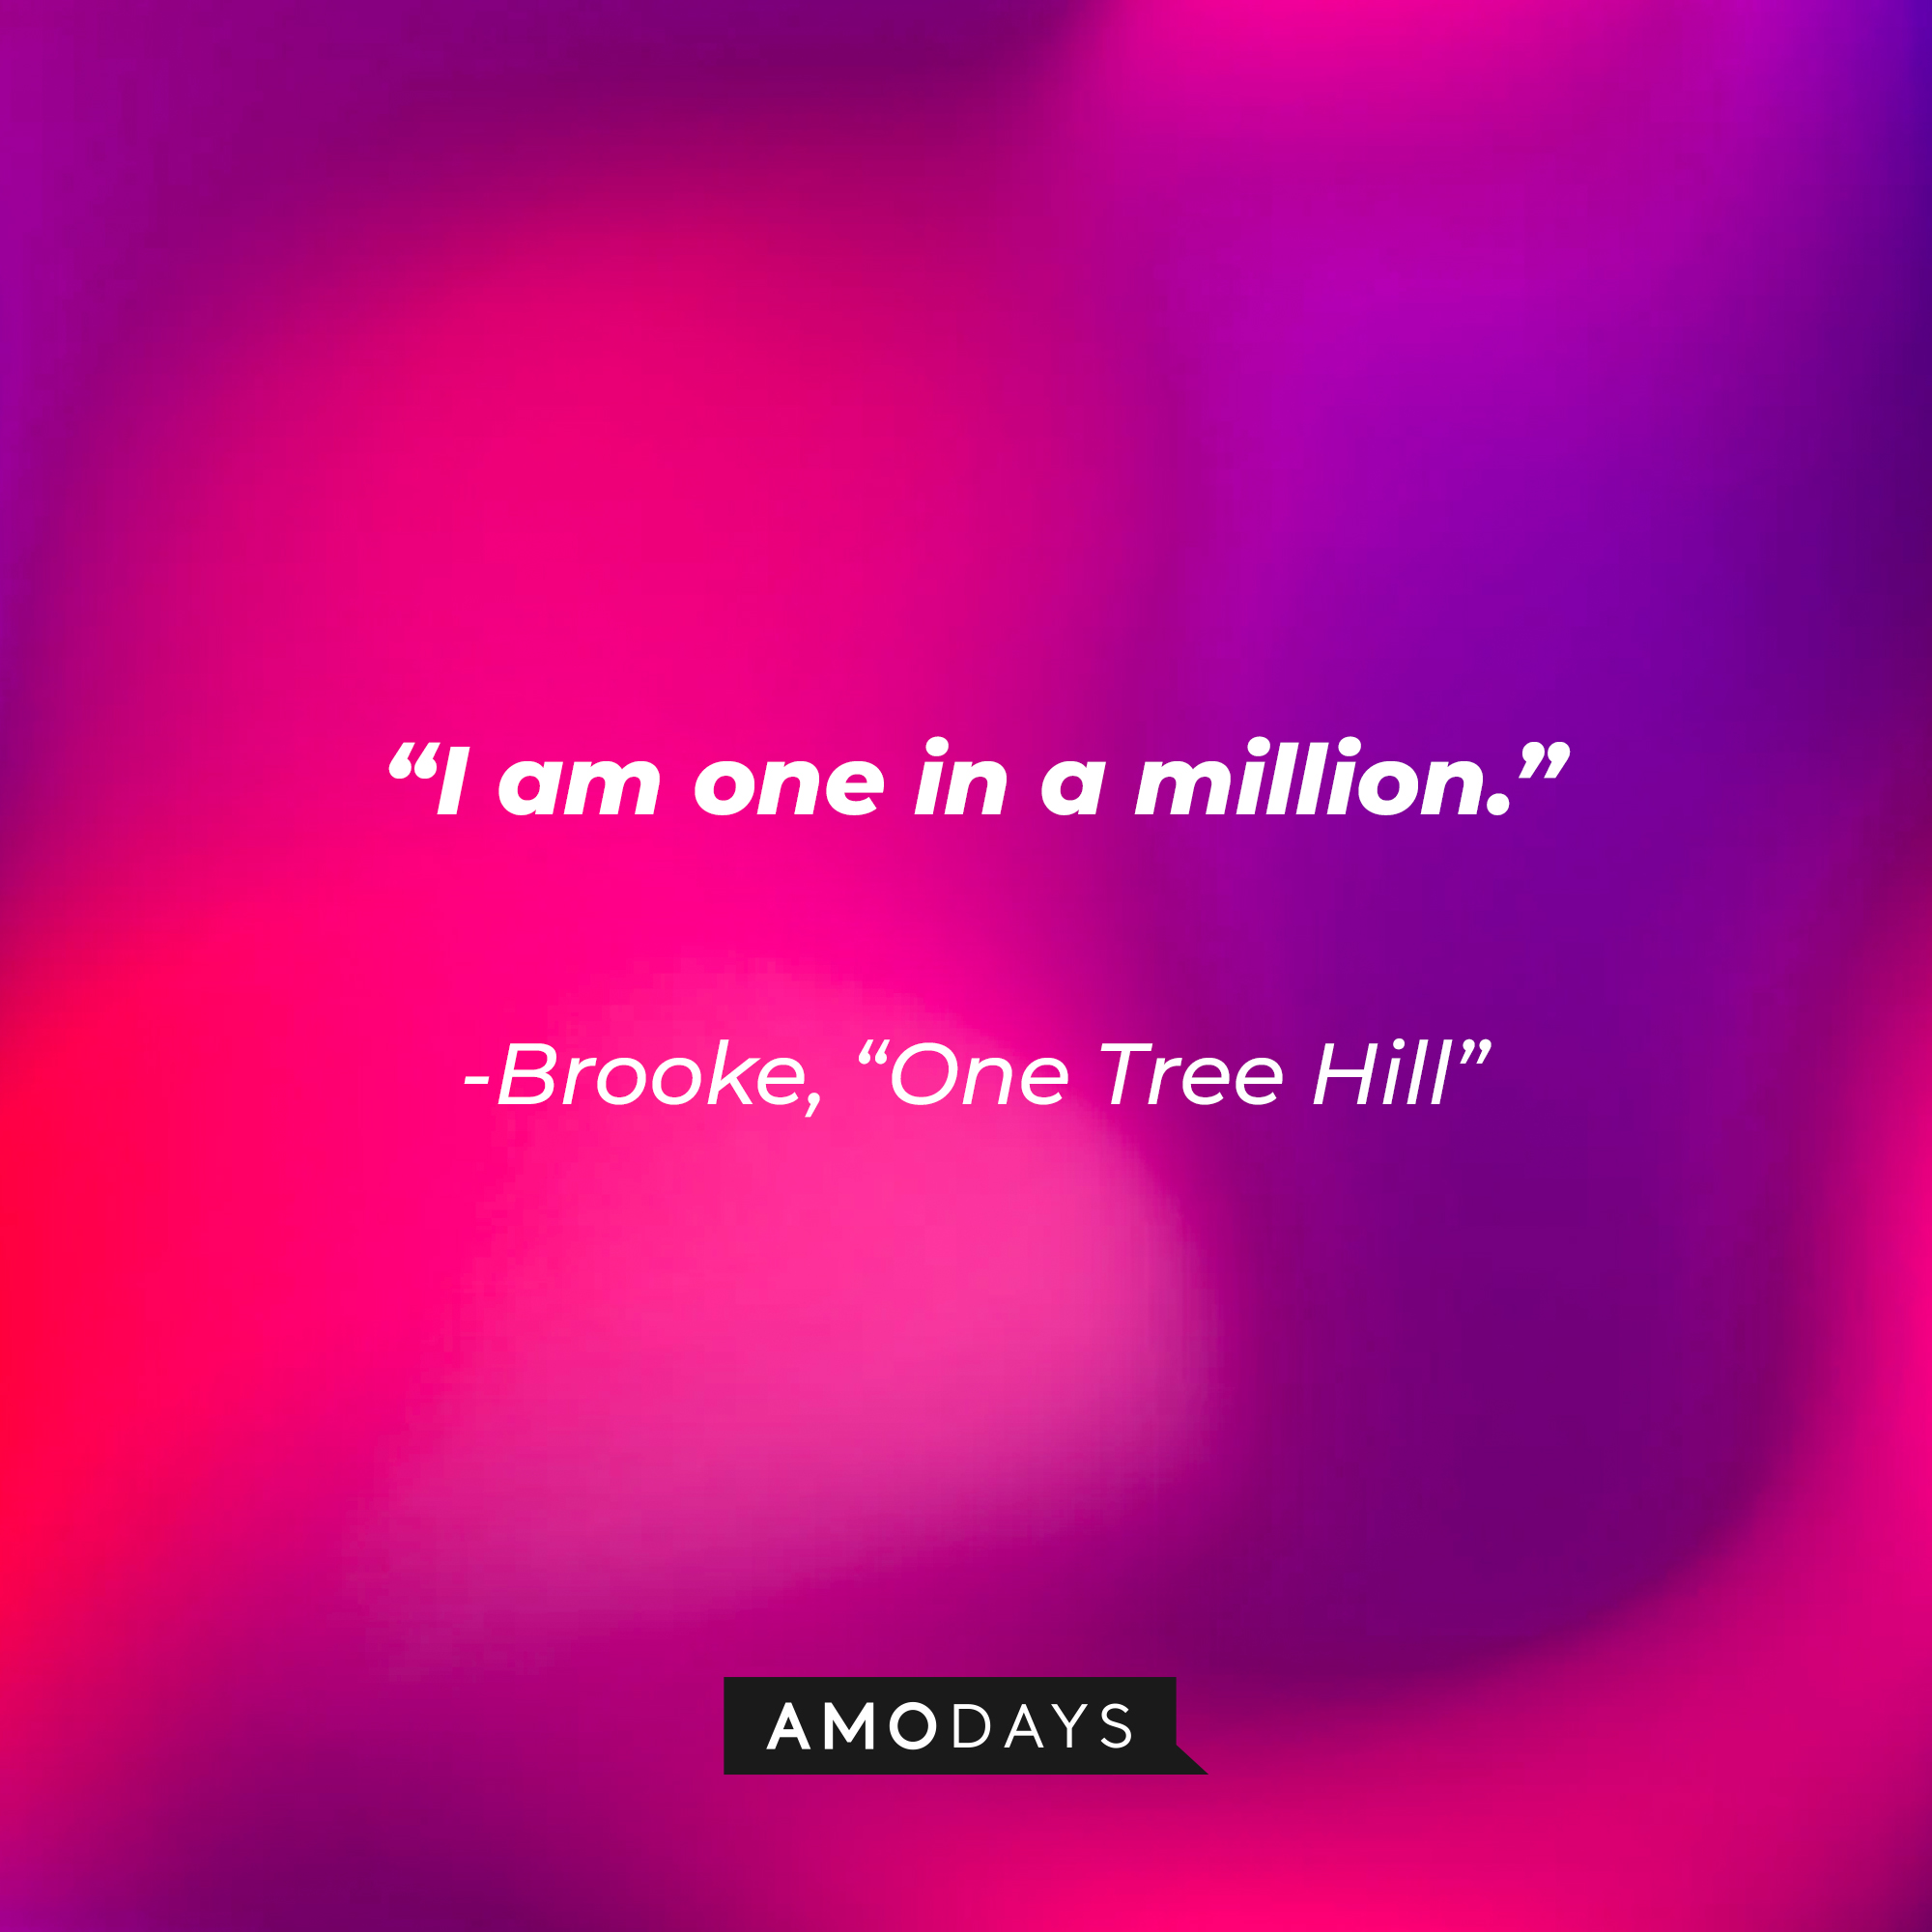 Brooke’s quote from “One Tree Hill”: “I am one in a million.” | Source: AmoDays